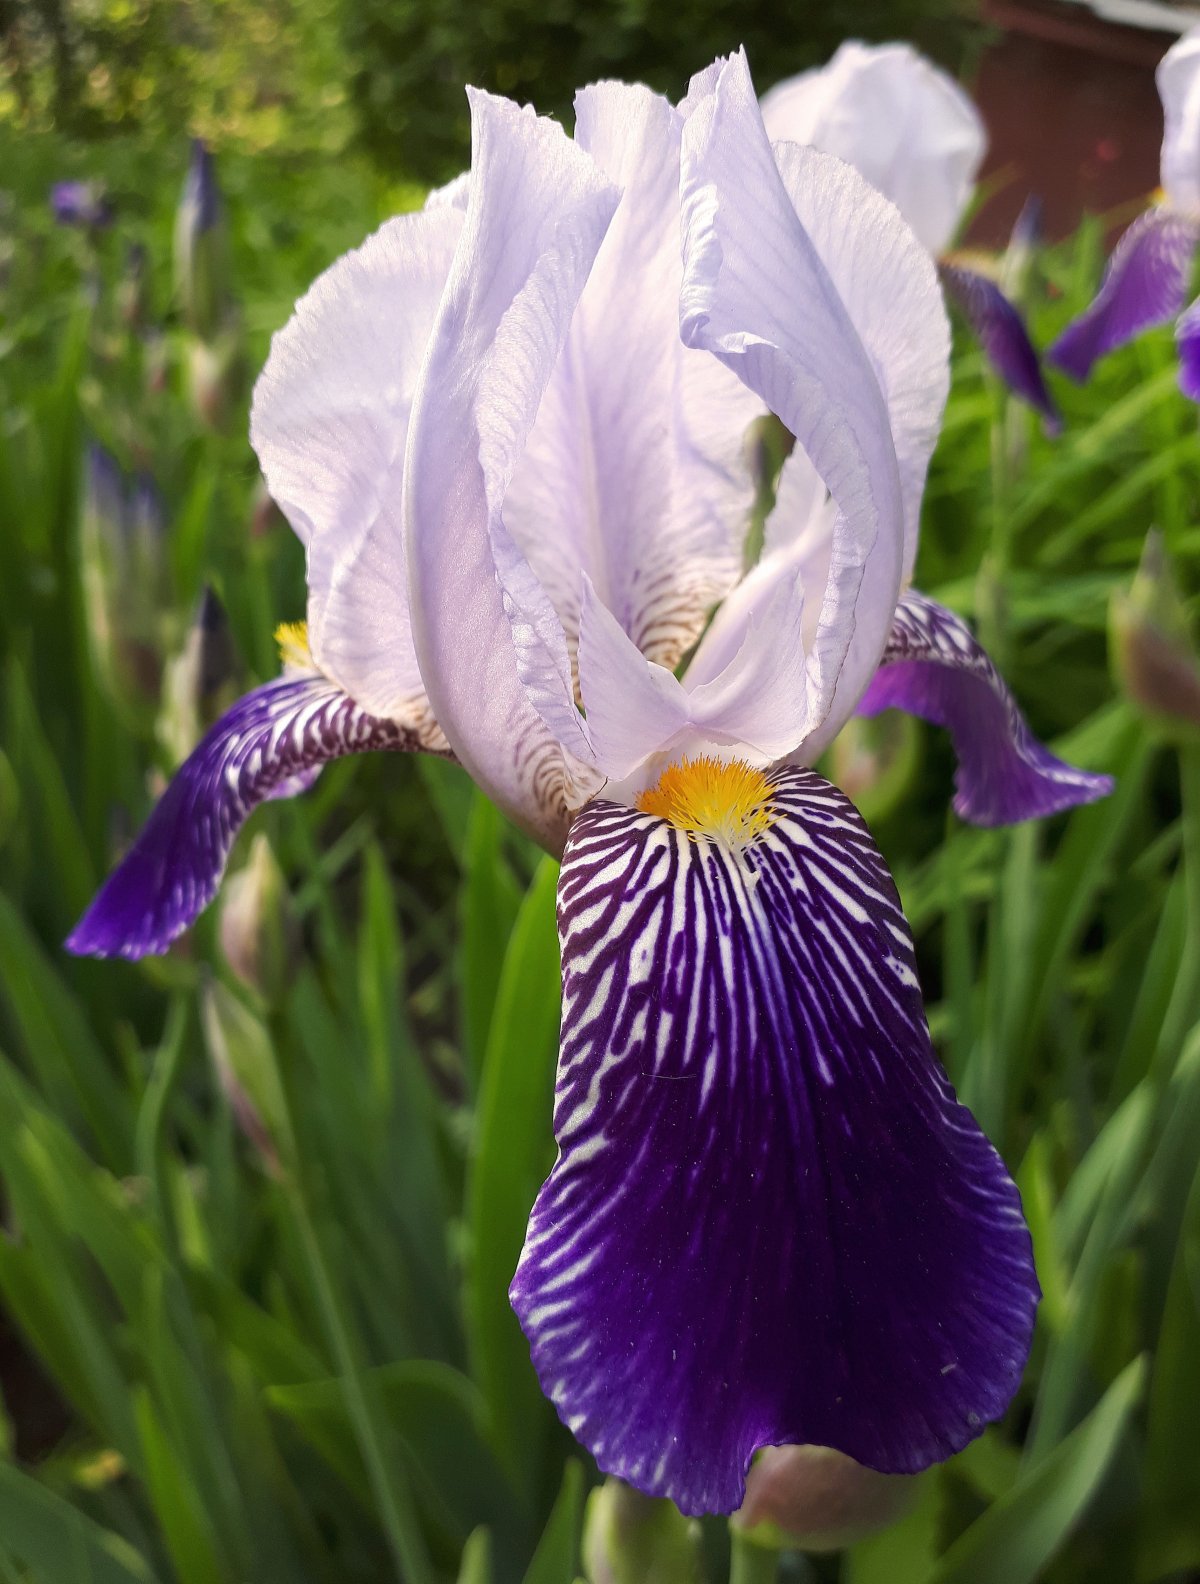 Fresh and beautiful iris pictures in various colors